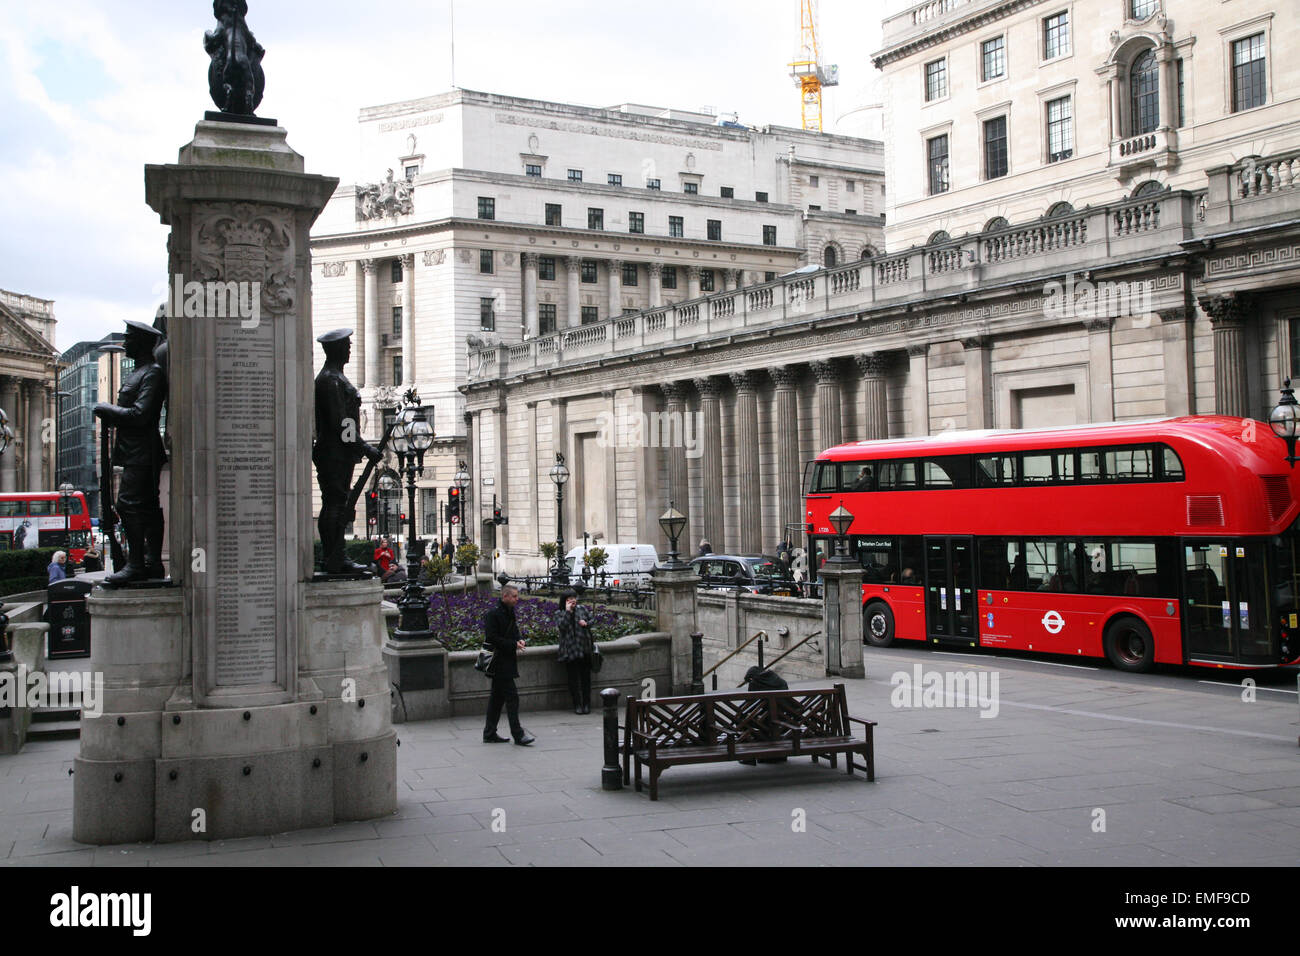 New design London Transport Bus at World War Memorial Statue, The Royal Exchange, with bus and commuters, London England. Stock Photo